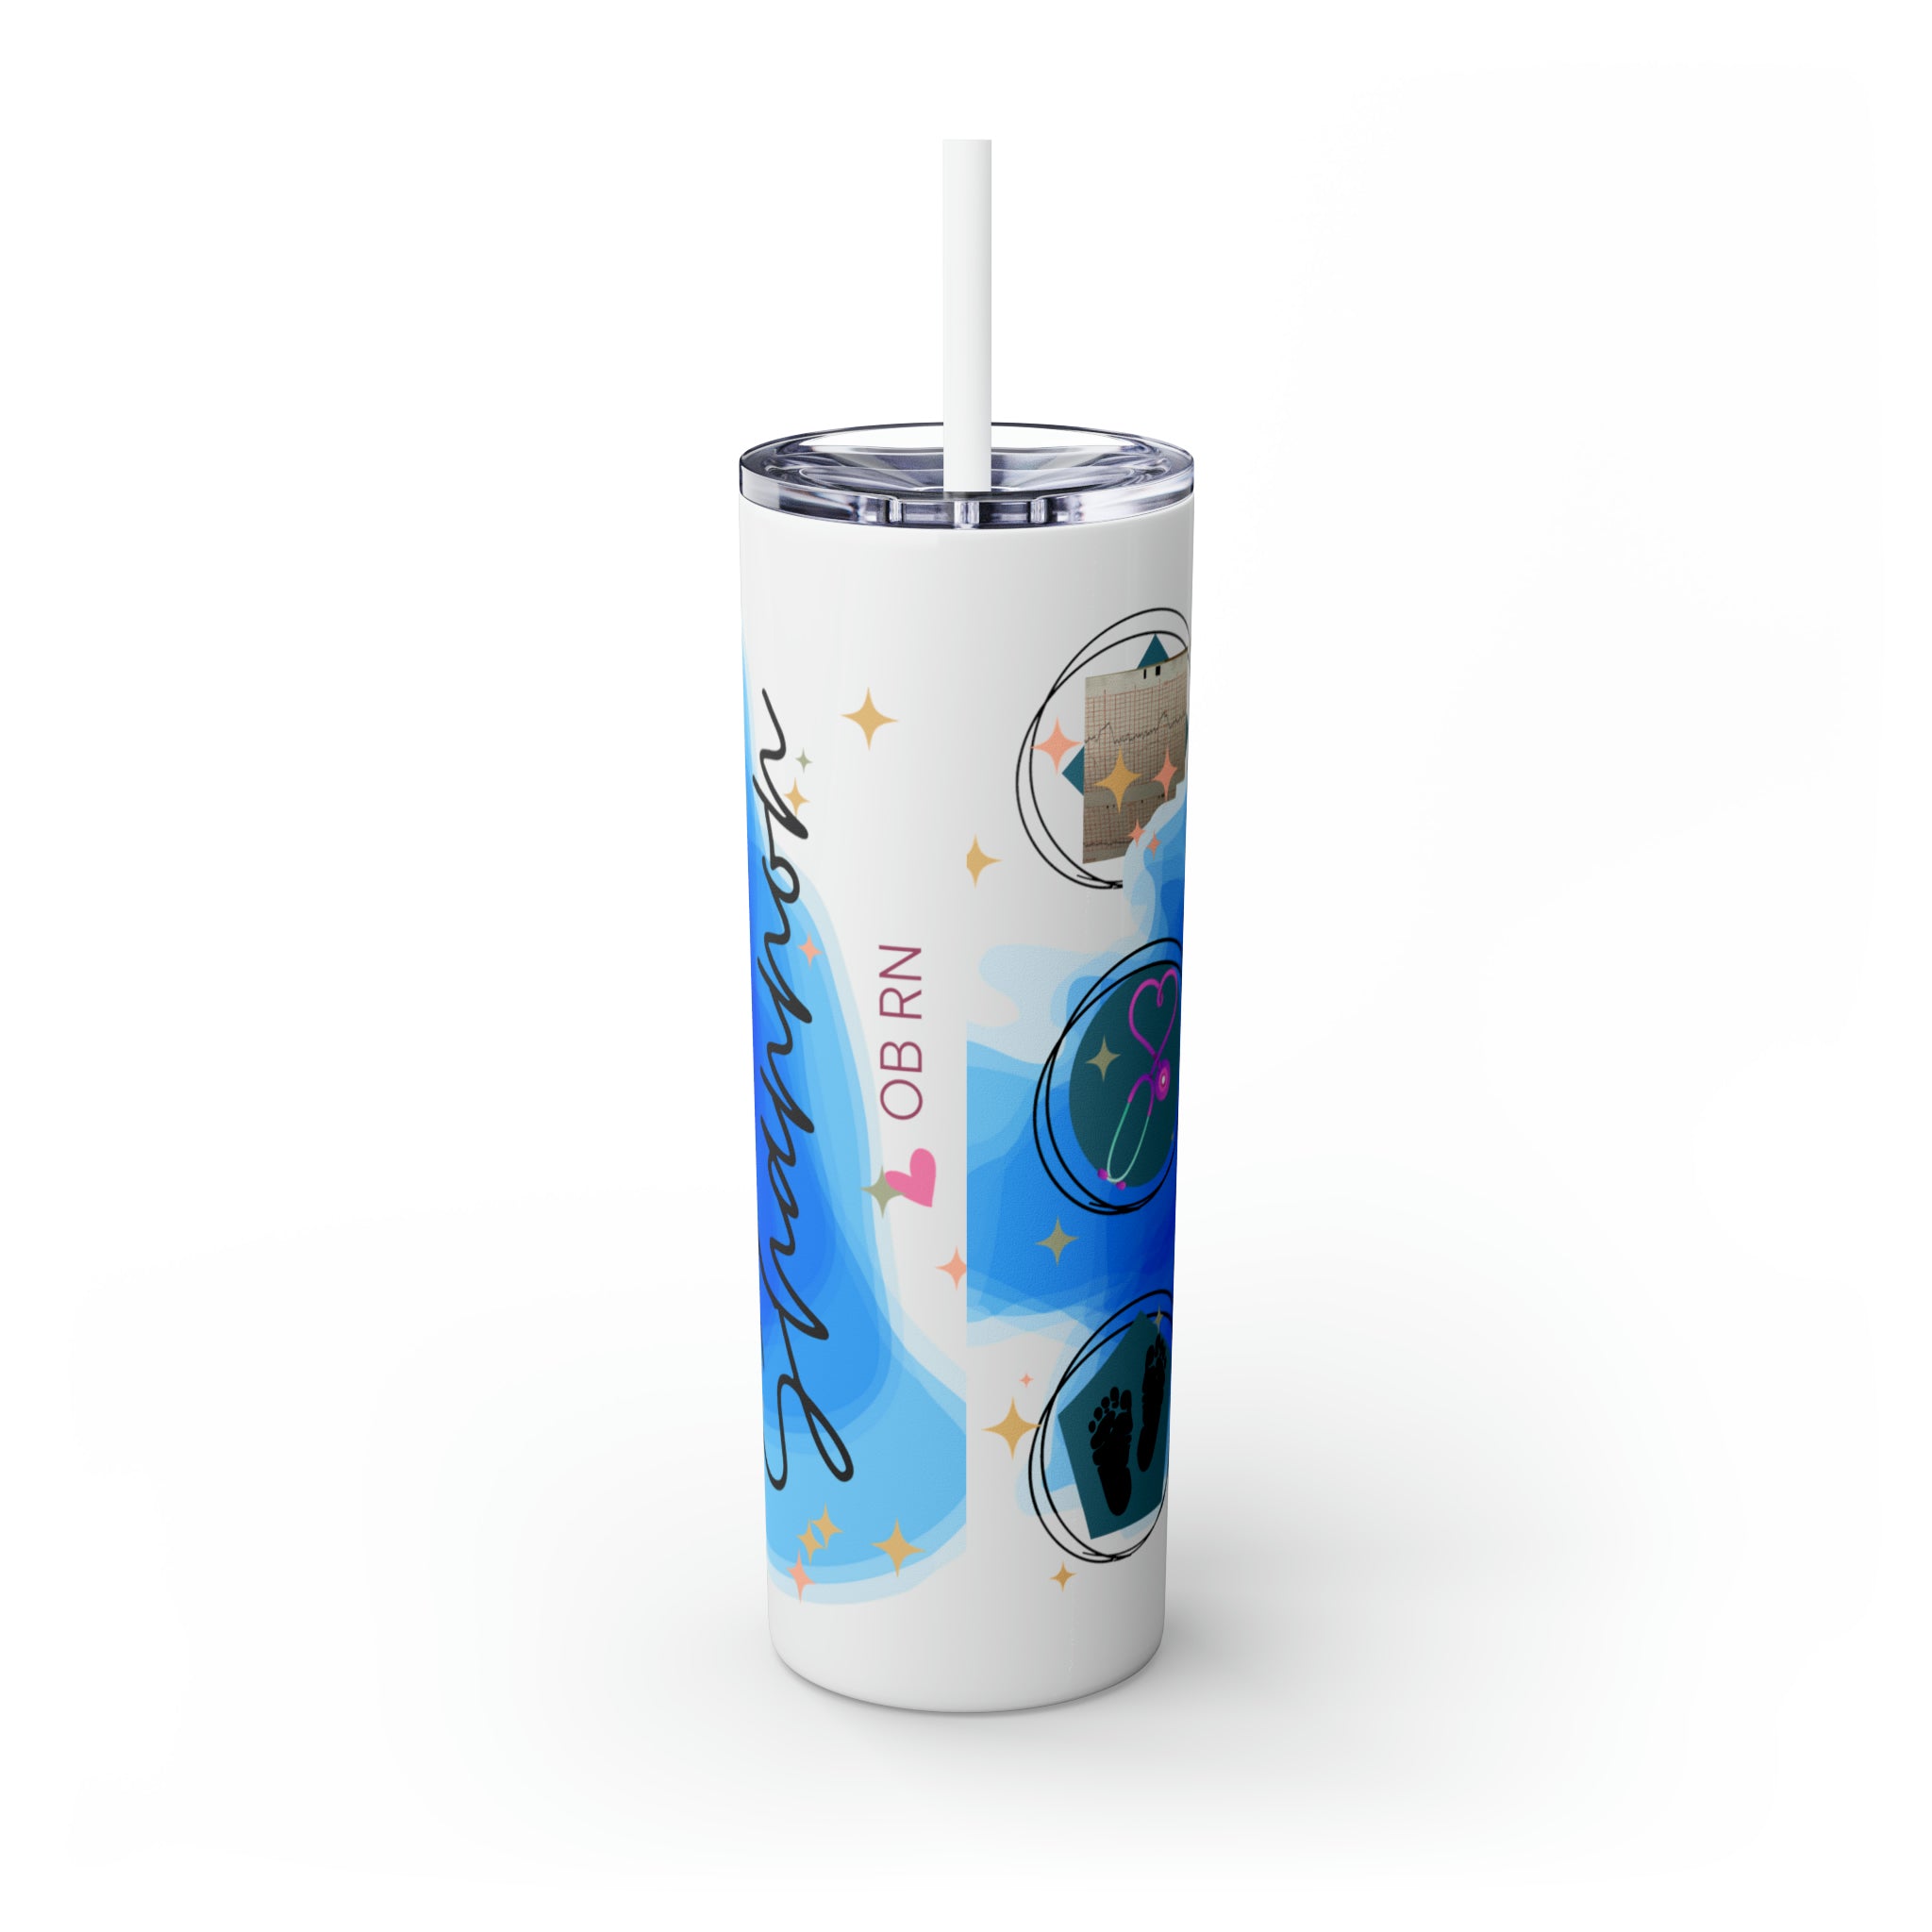 OB Nurse Skinny Tumbler with Straw, 20oz for hot or cold drinks.